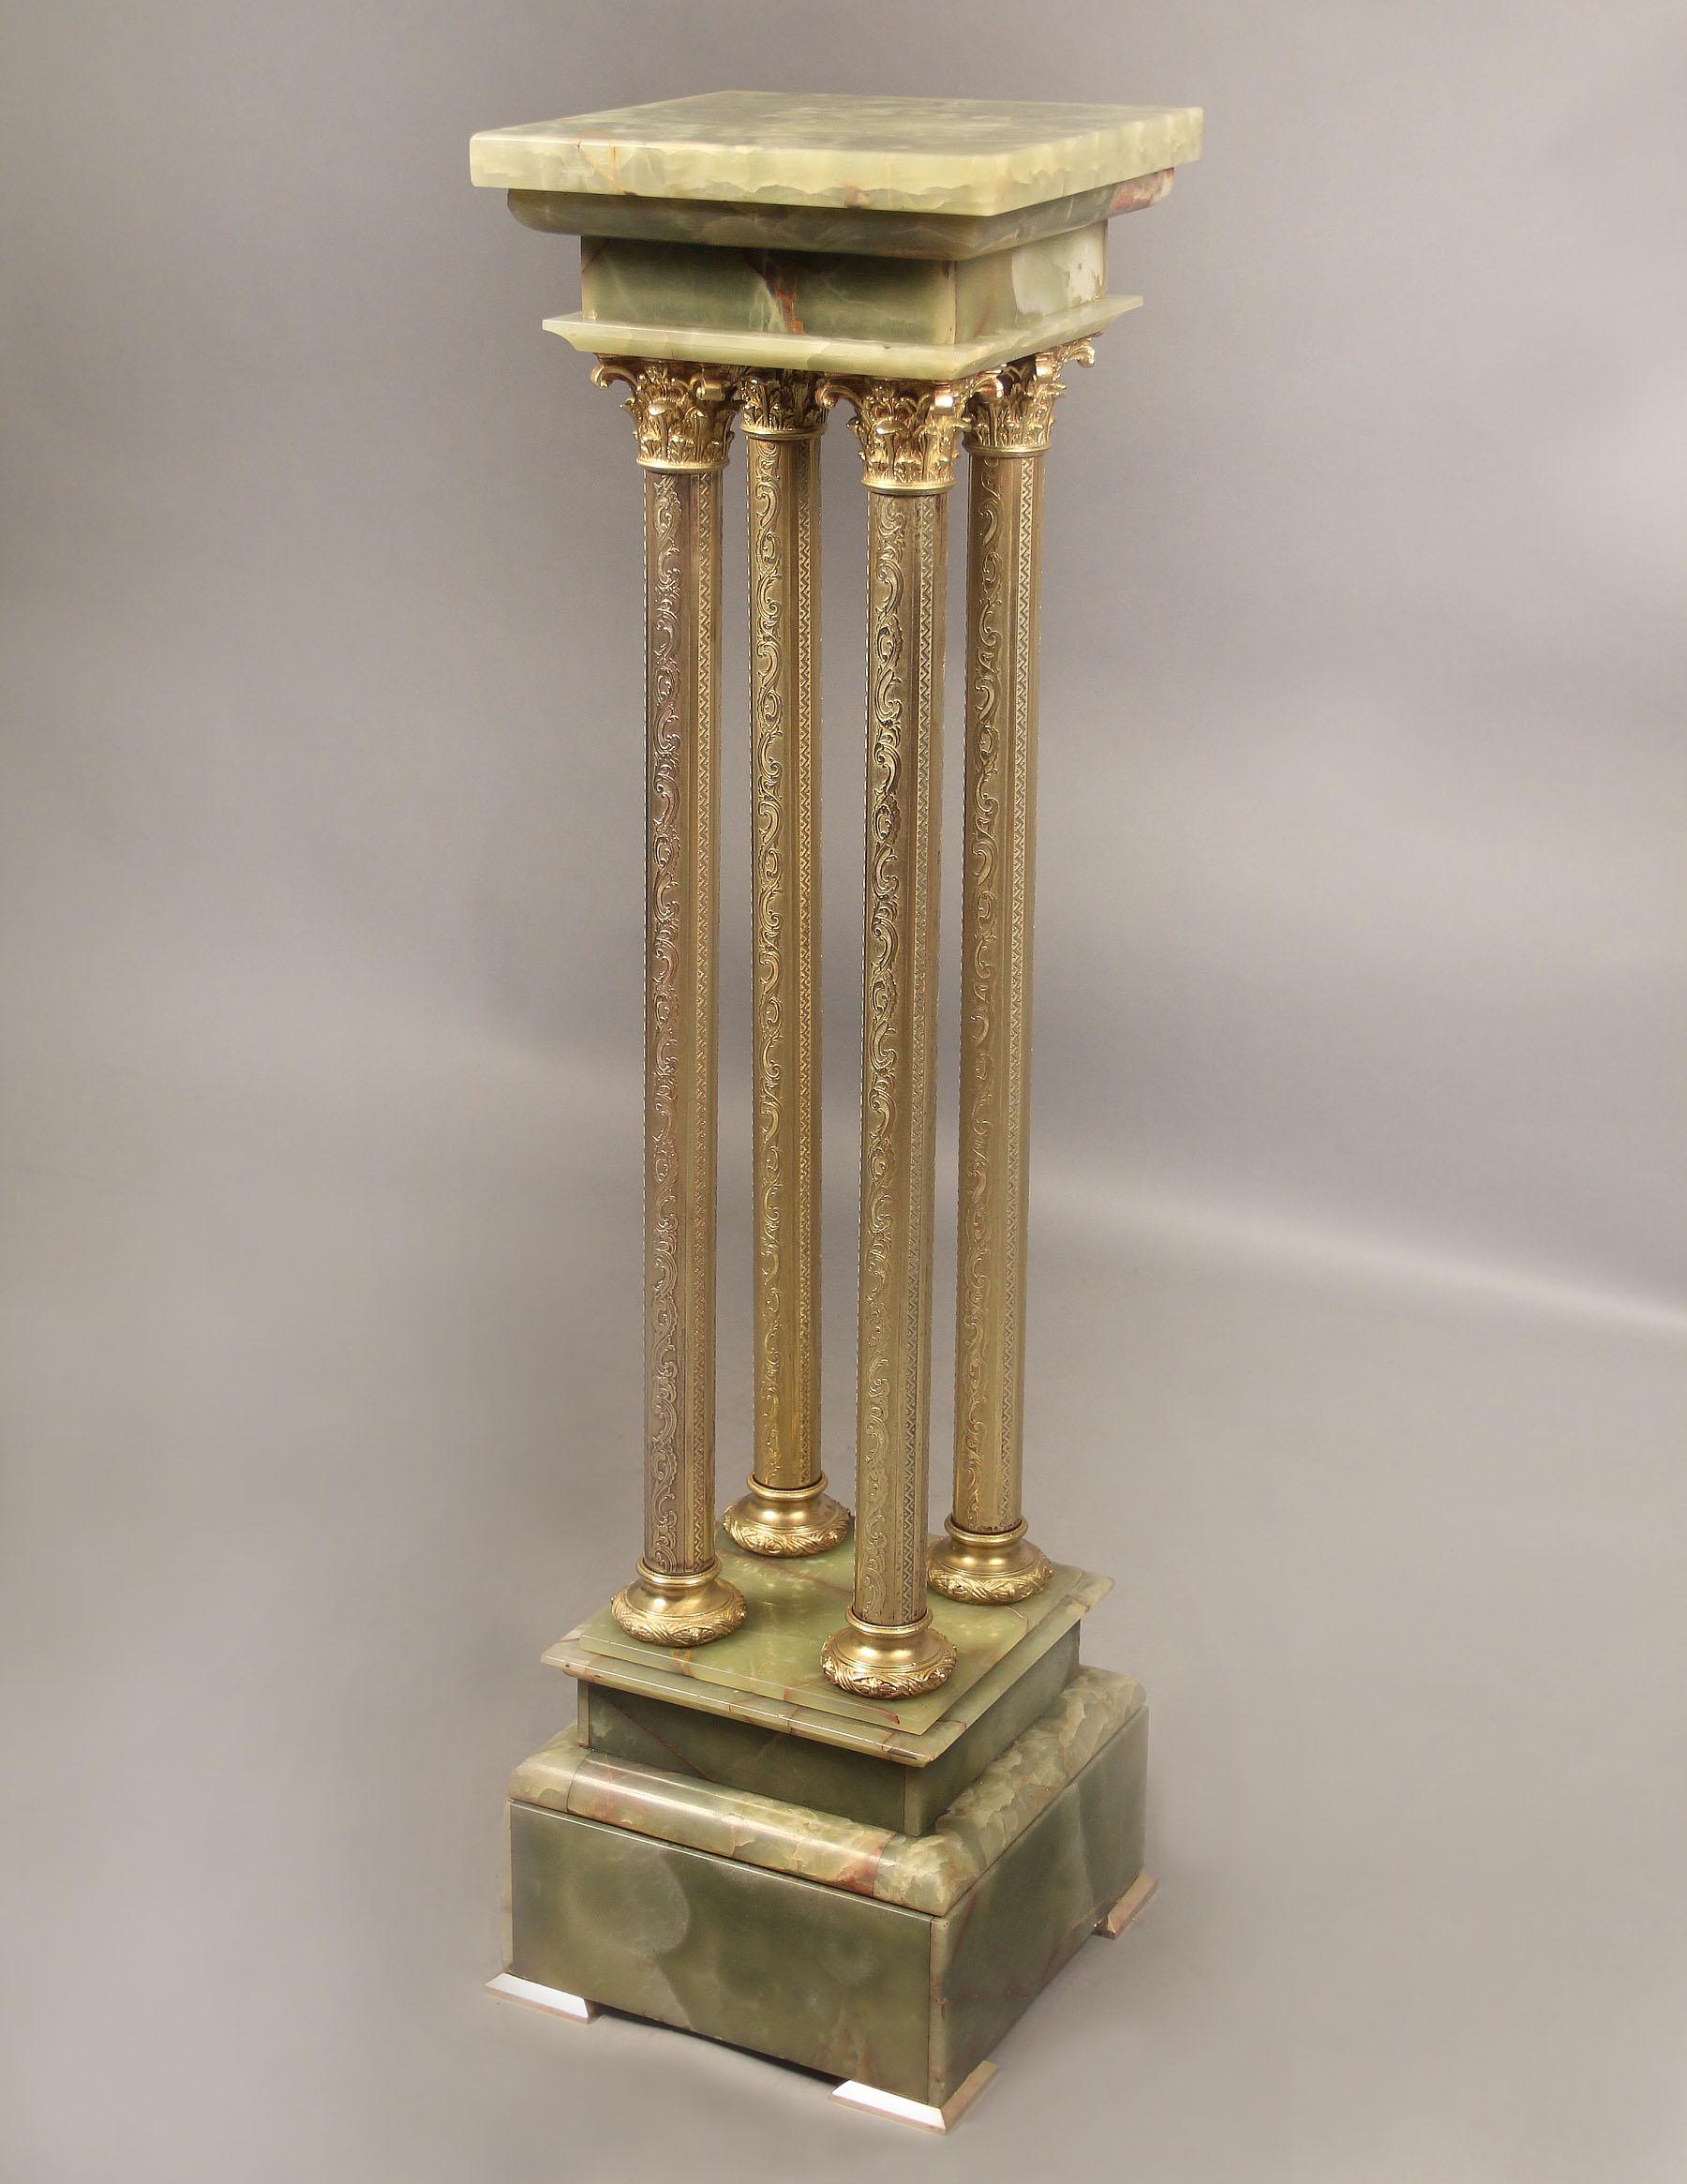 An Interesting Late 19th Century Gilt Bronze and Onyx Pedestal

Square onyx swivel top above four finely chiseled and designed gilt bronze pillars, standing on a tiered base on bronze feet.